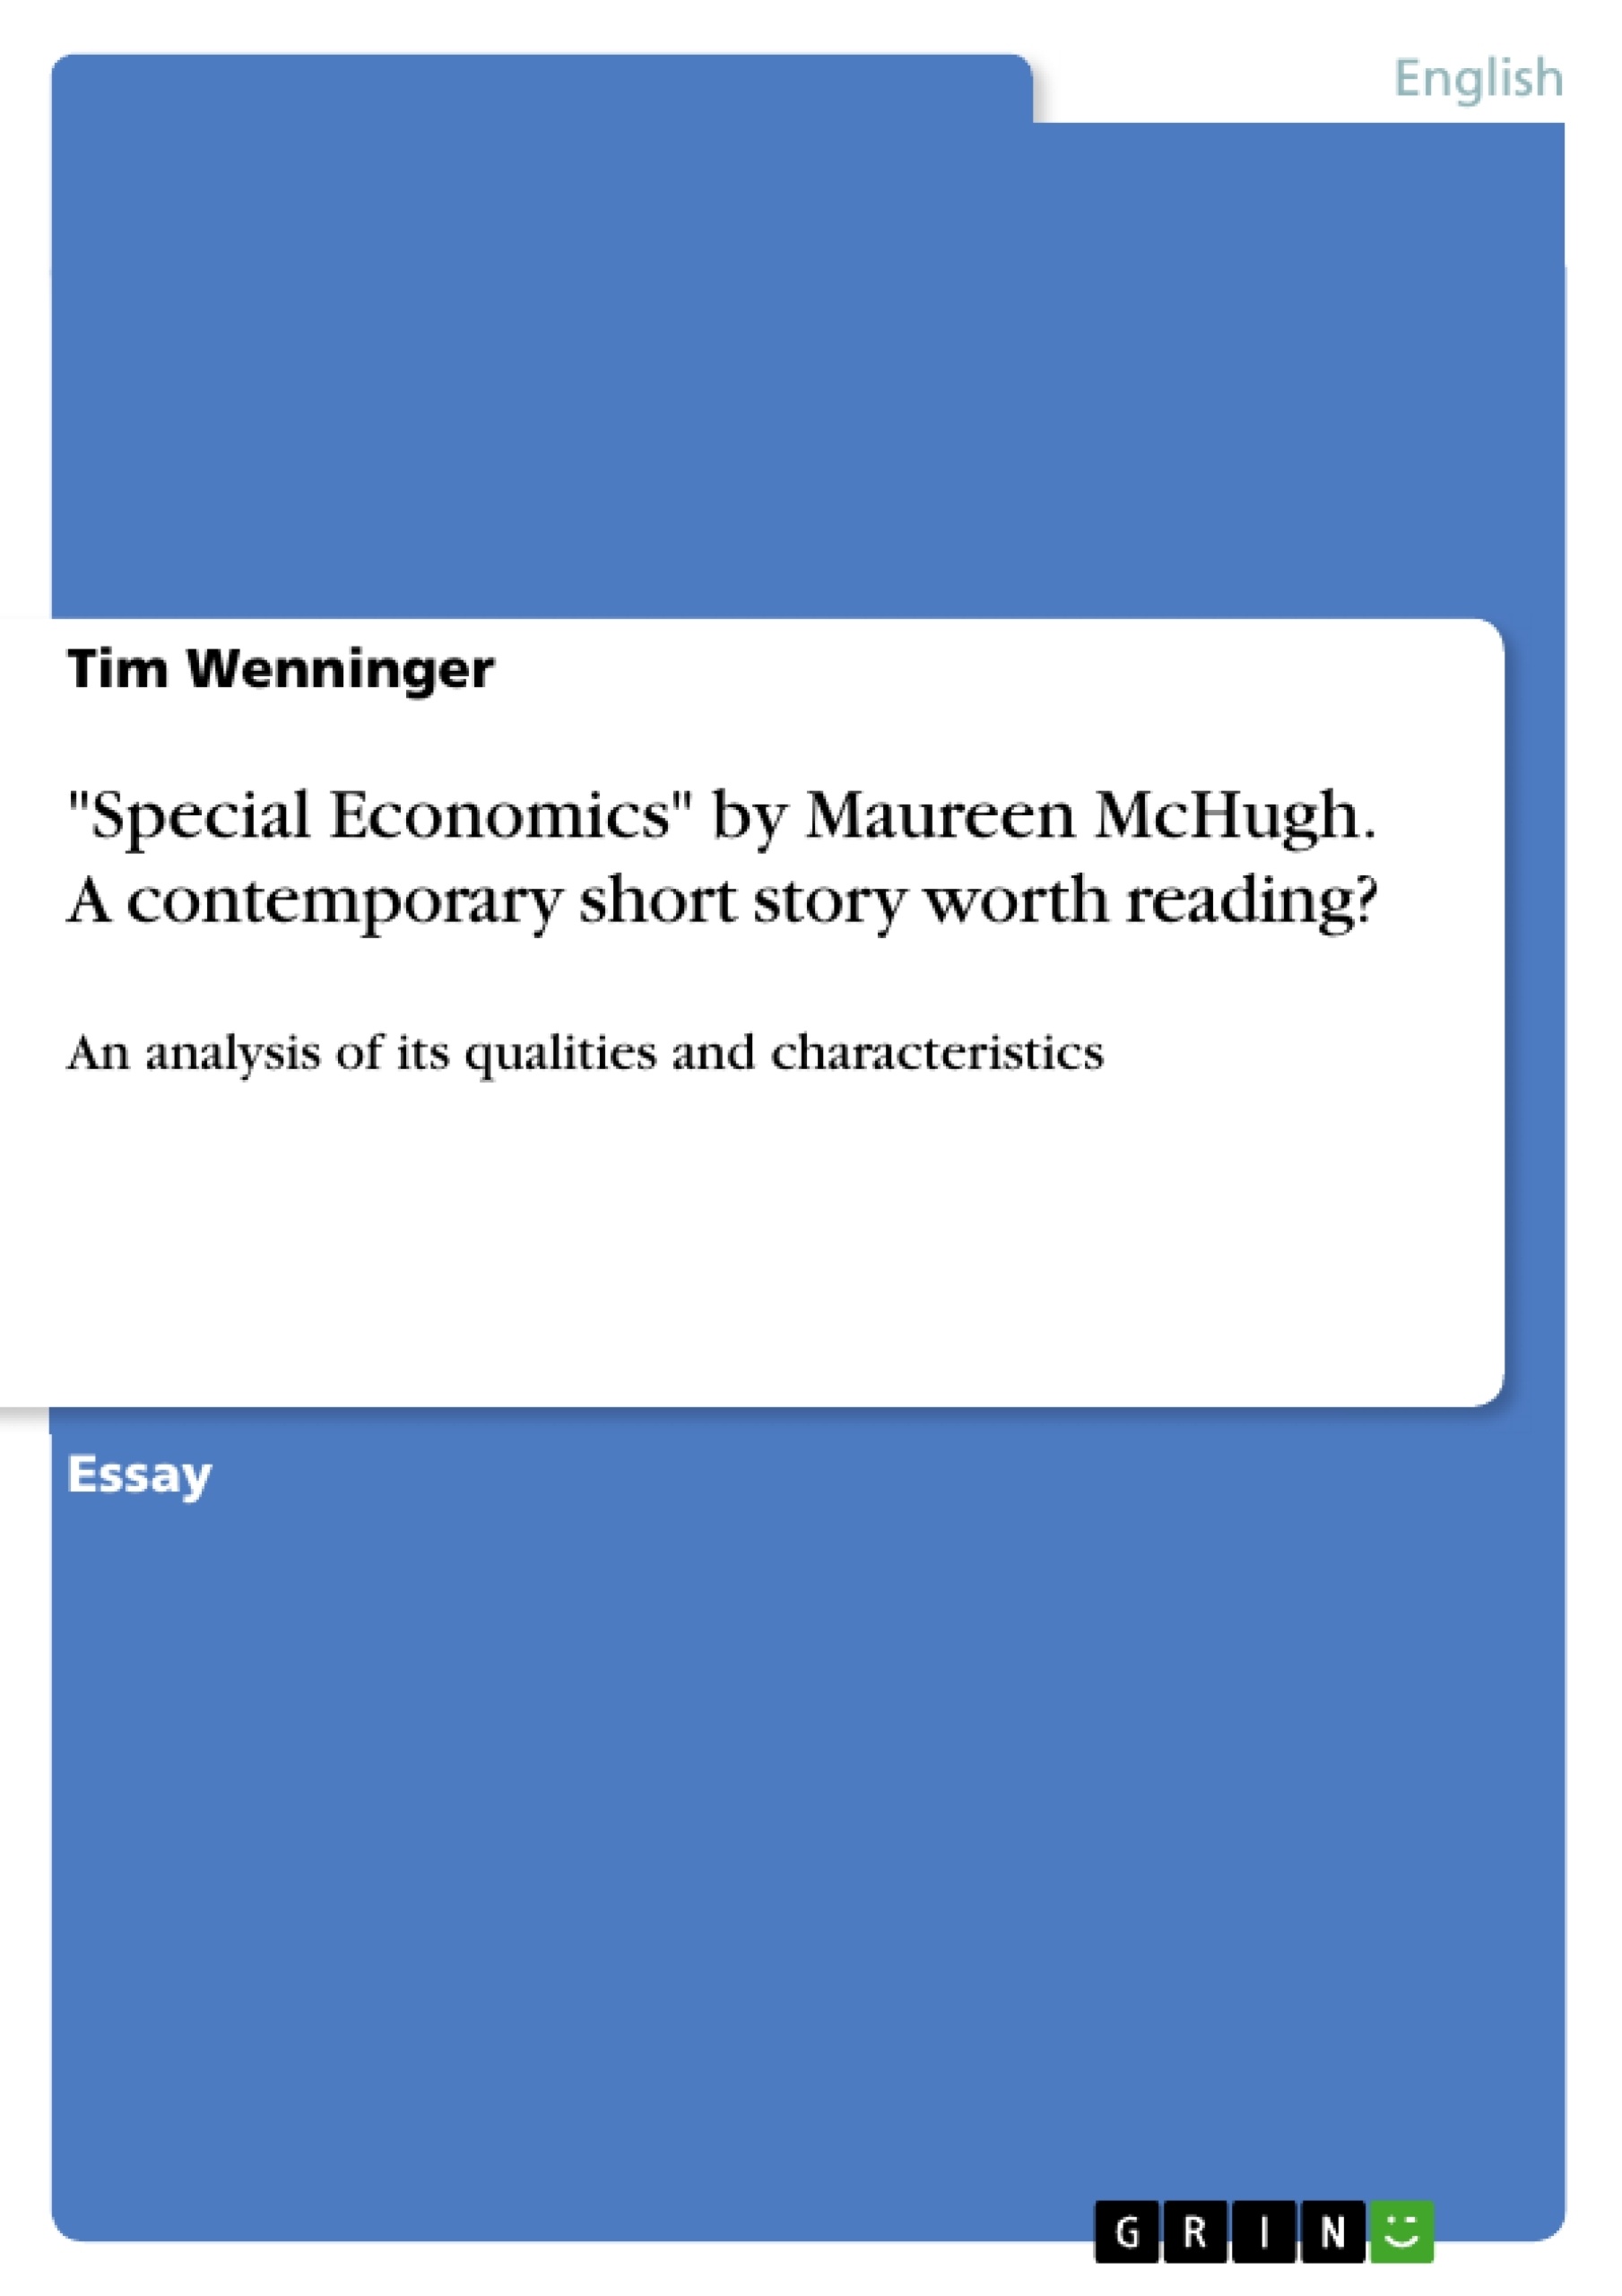 Titel: "Special Economics" by Maureen McHugh. A contemporary short story worth reading?